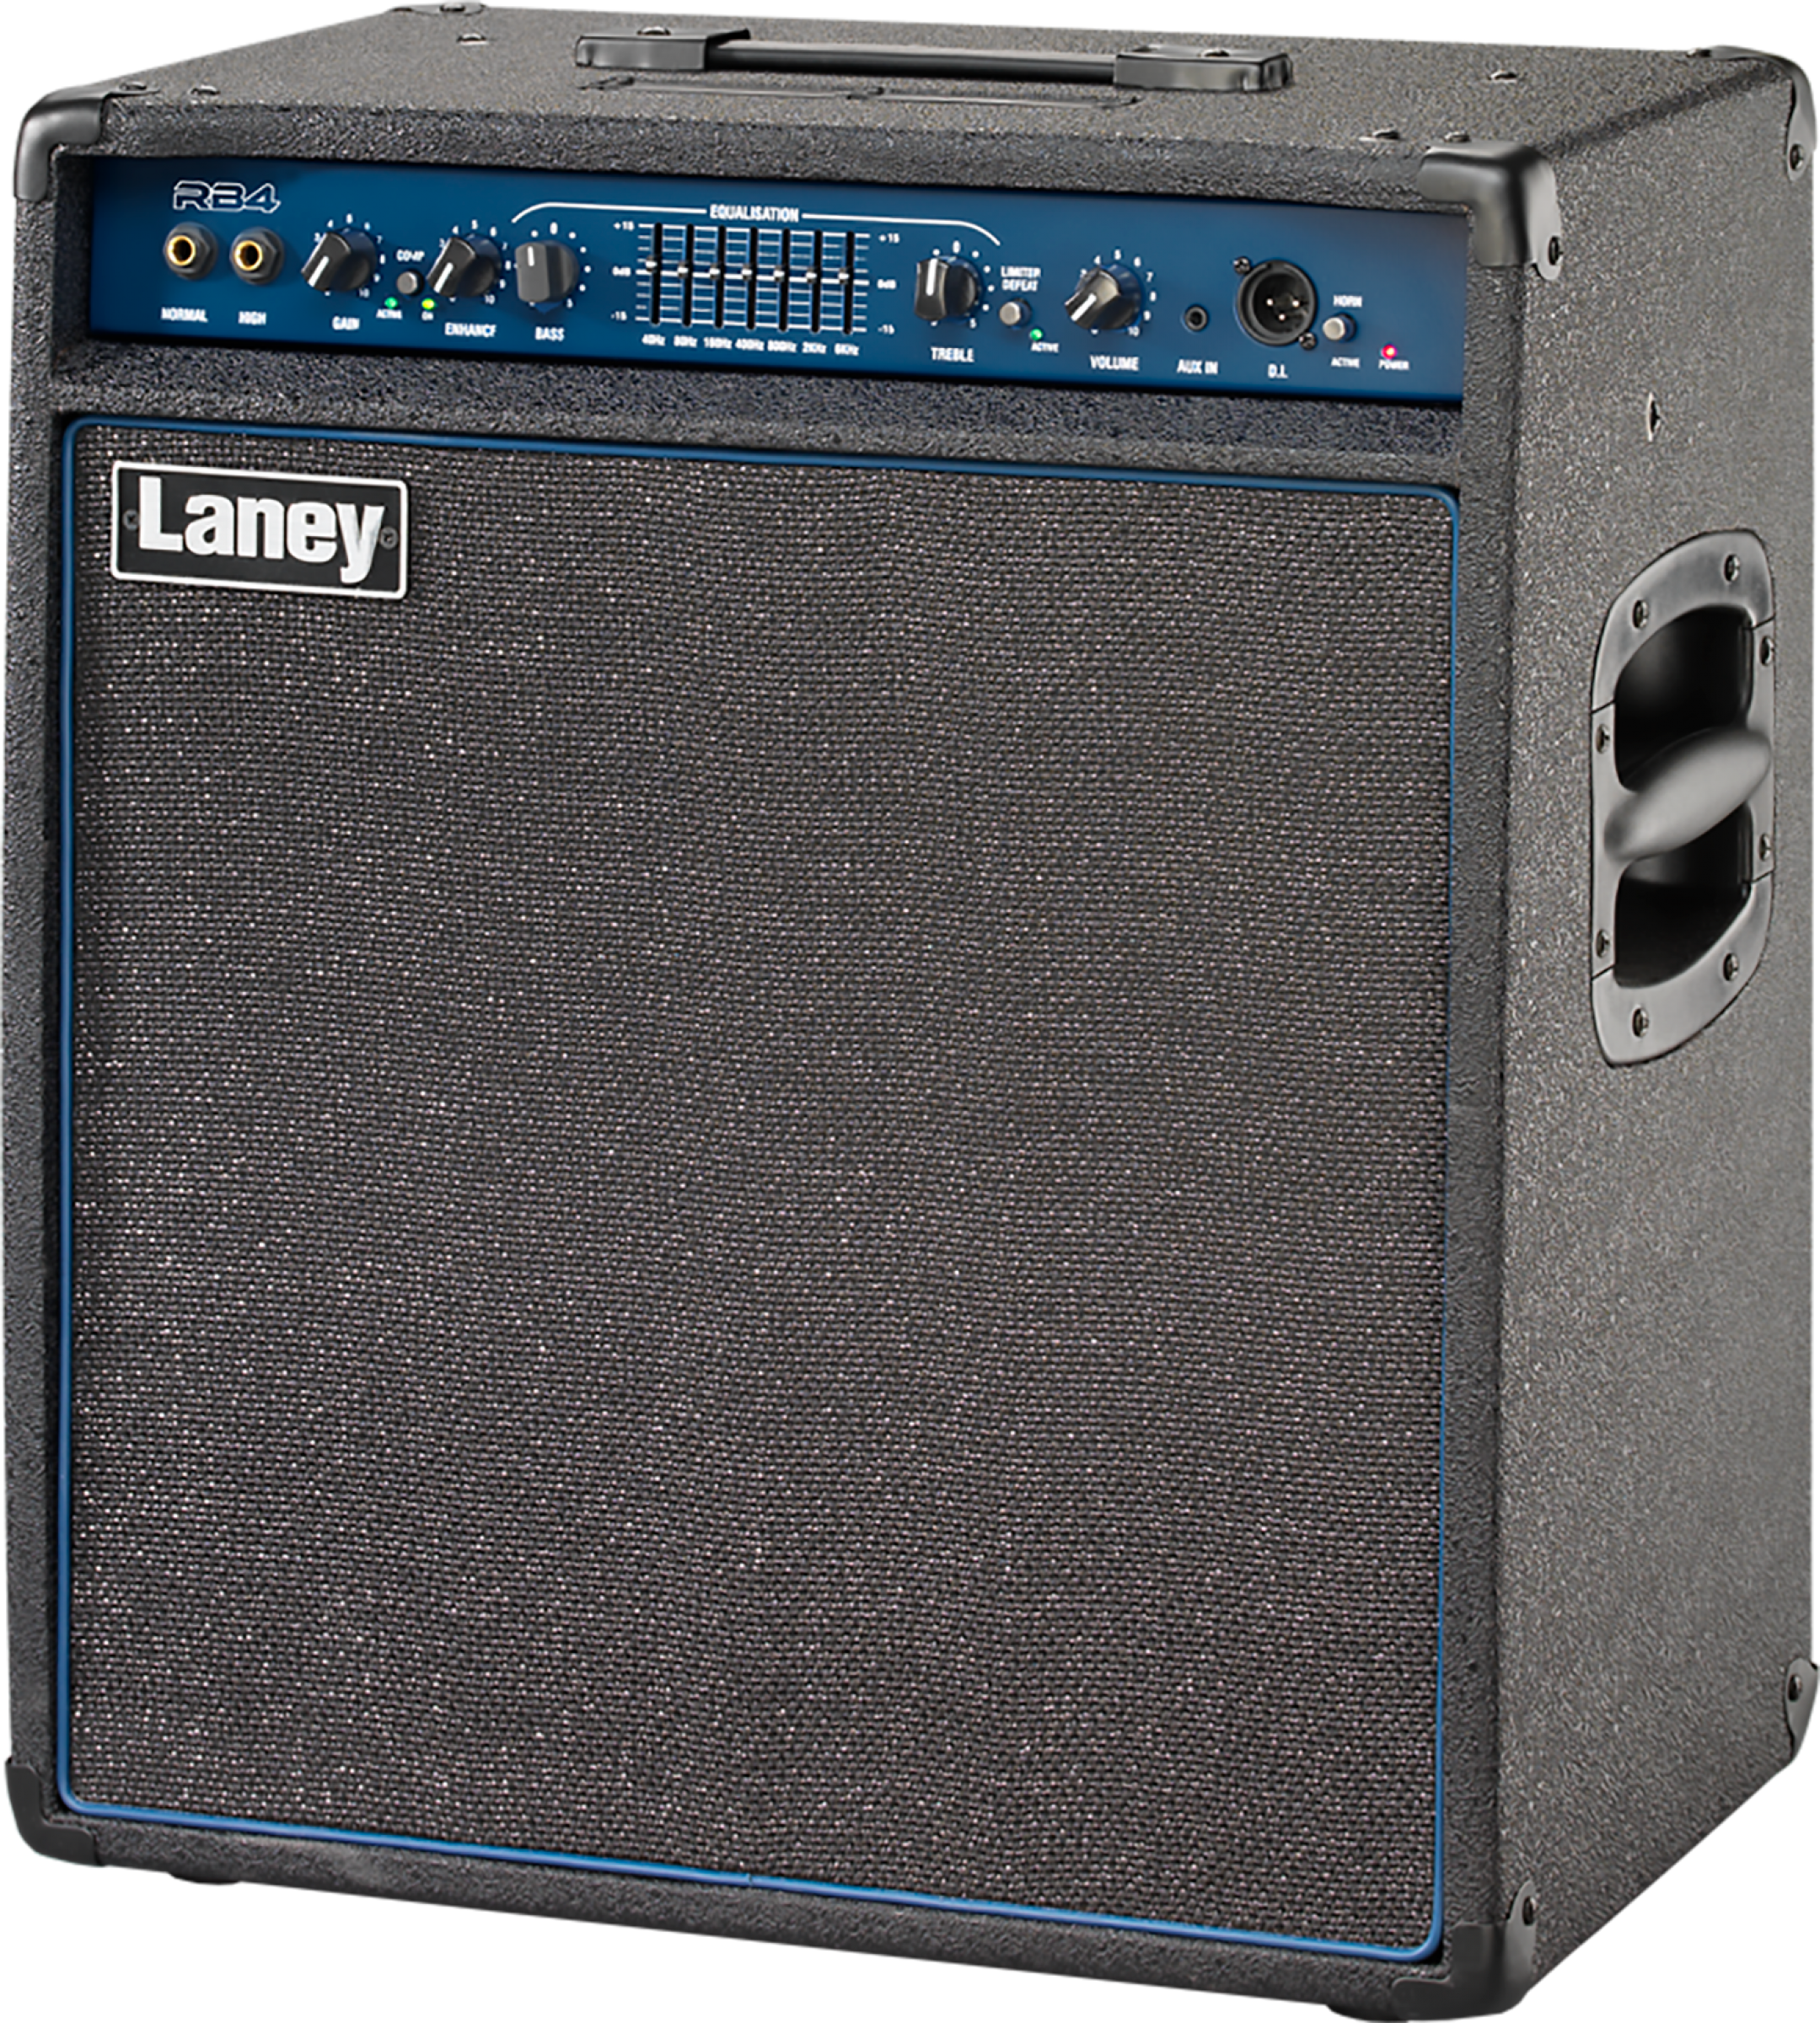 Laney Rb4 165w 1x15 - Bass combo amp - Variation 2